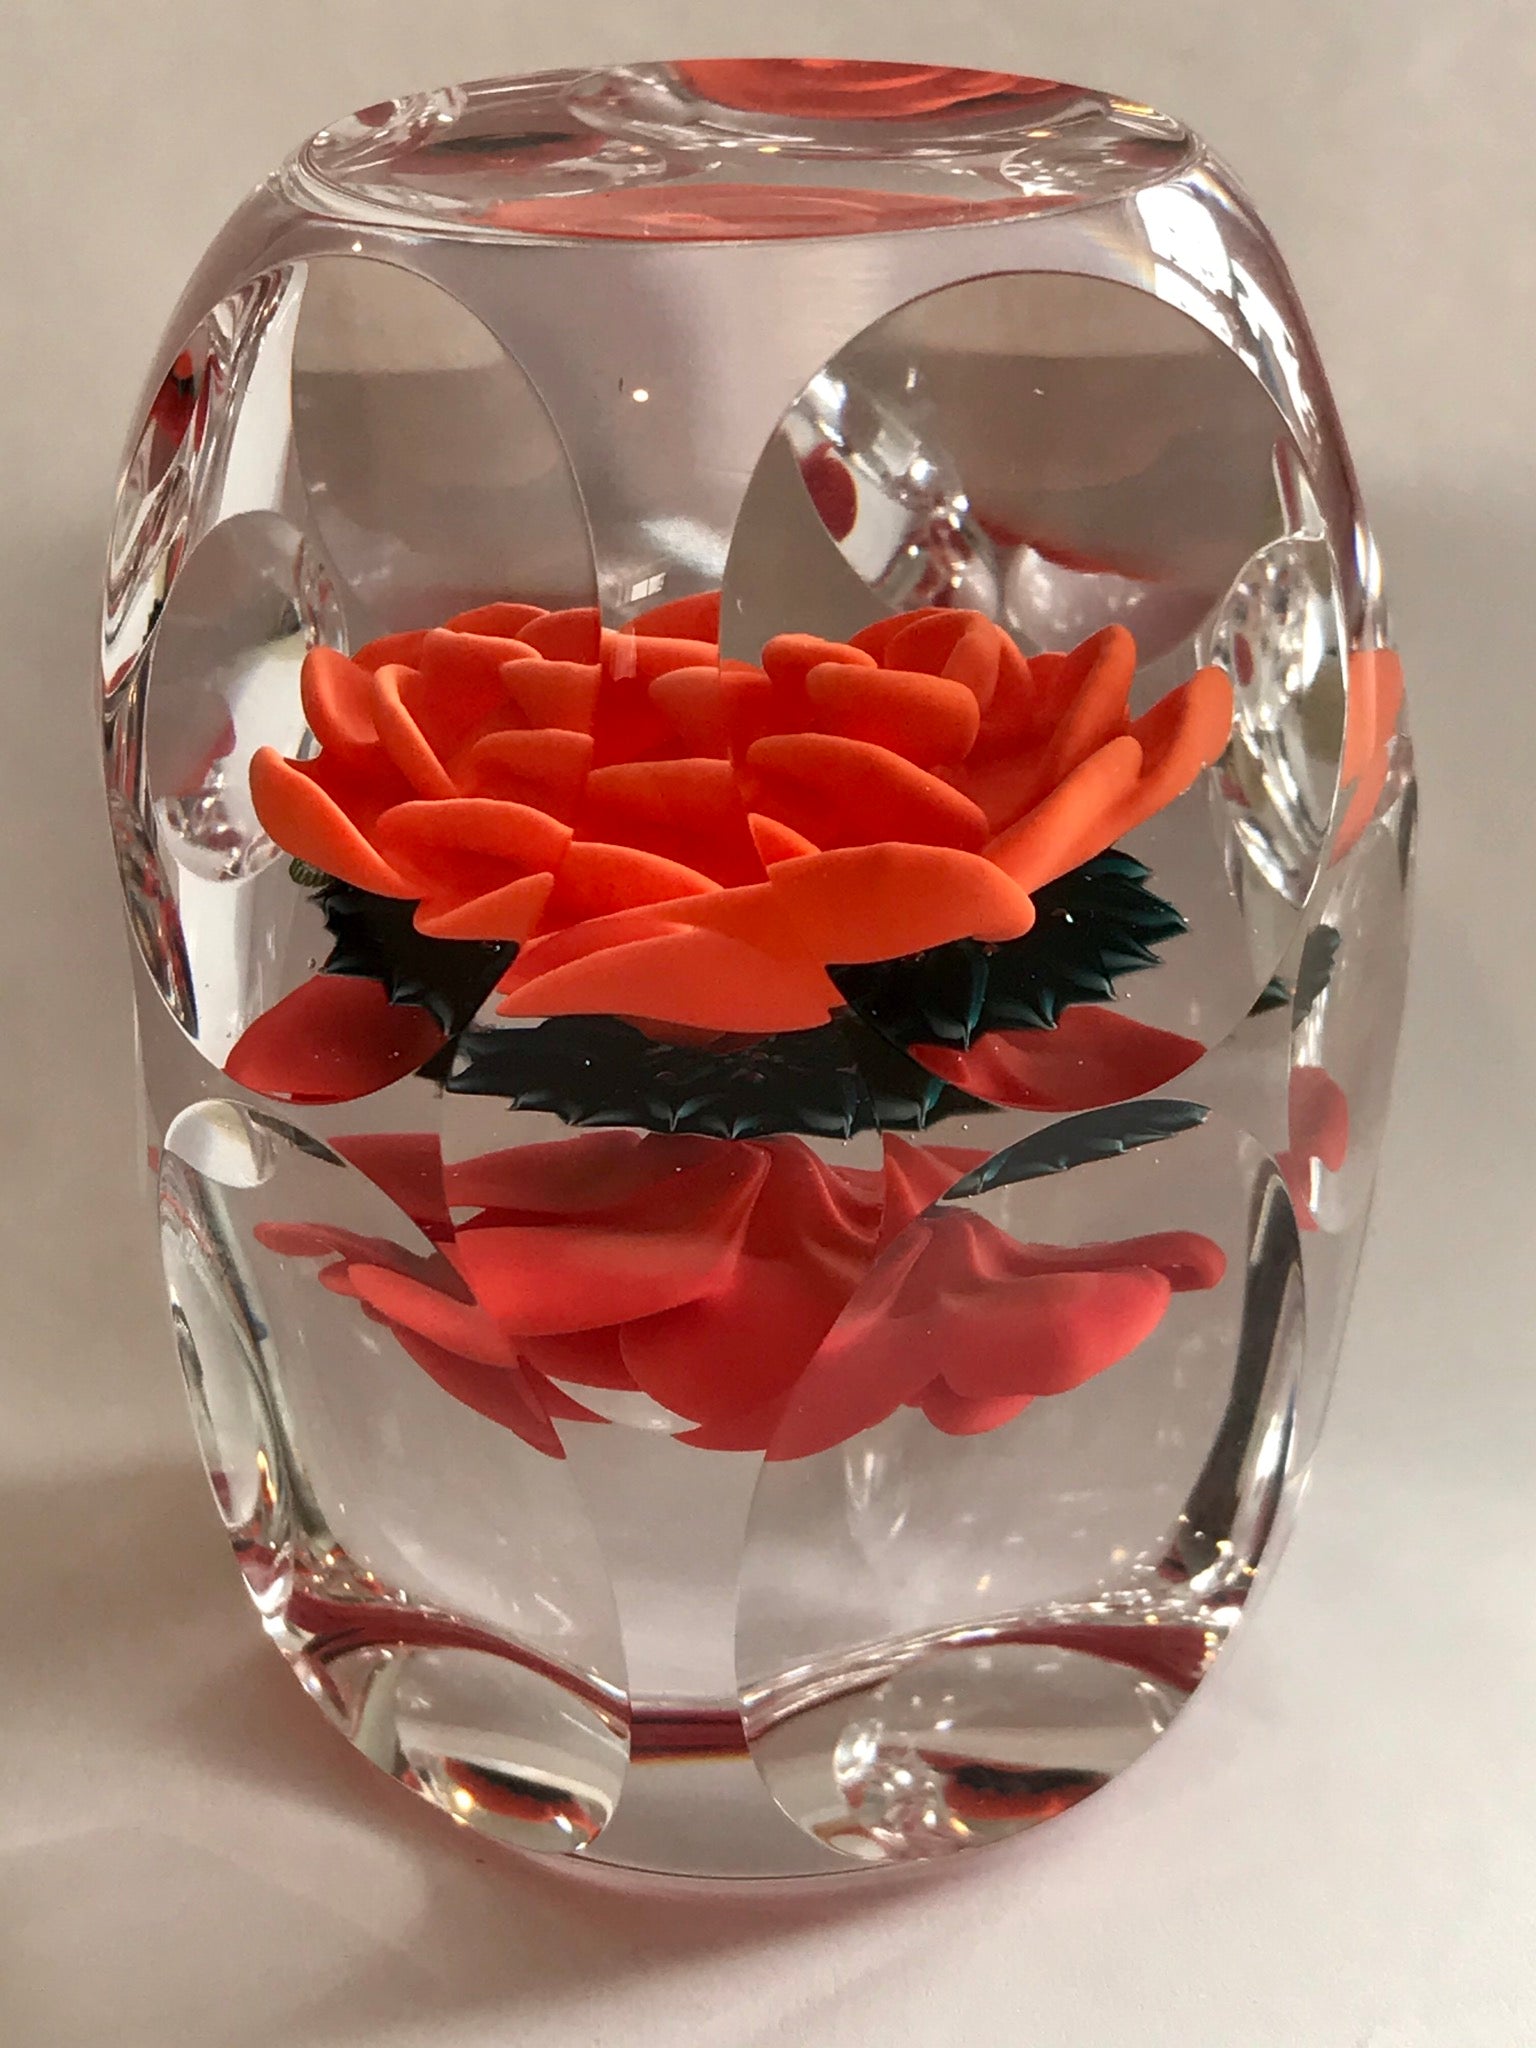 A Richard Loesel double crimp rose paperweight - Red and Orange